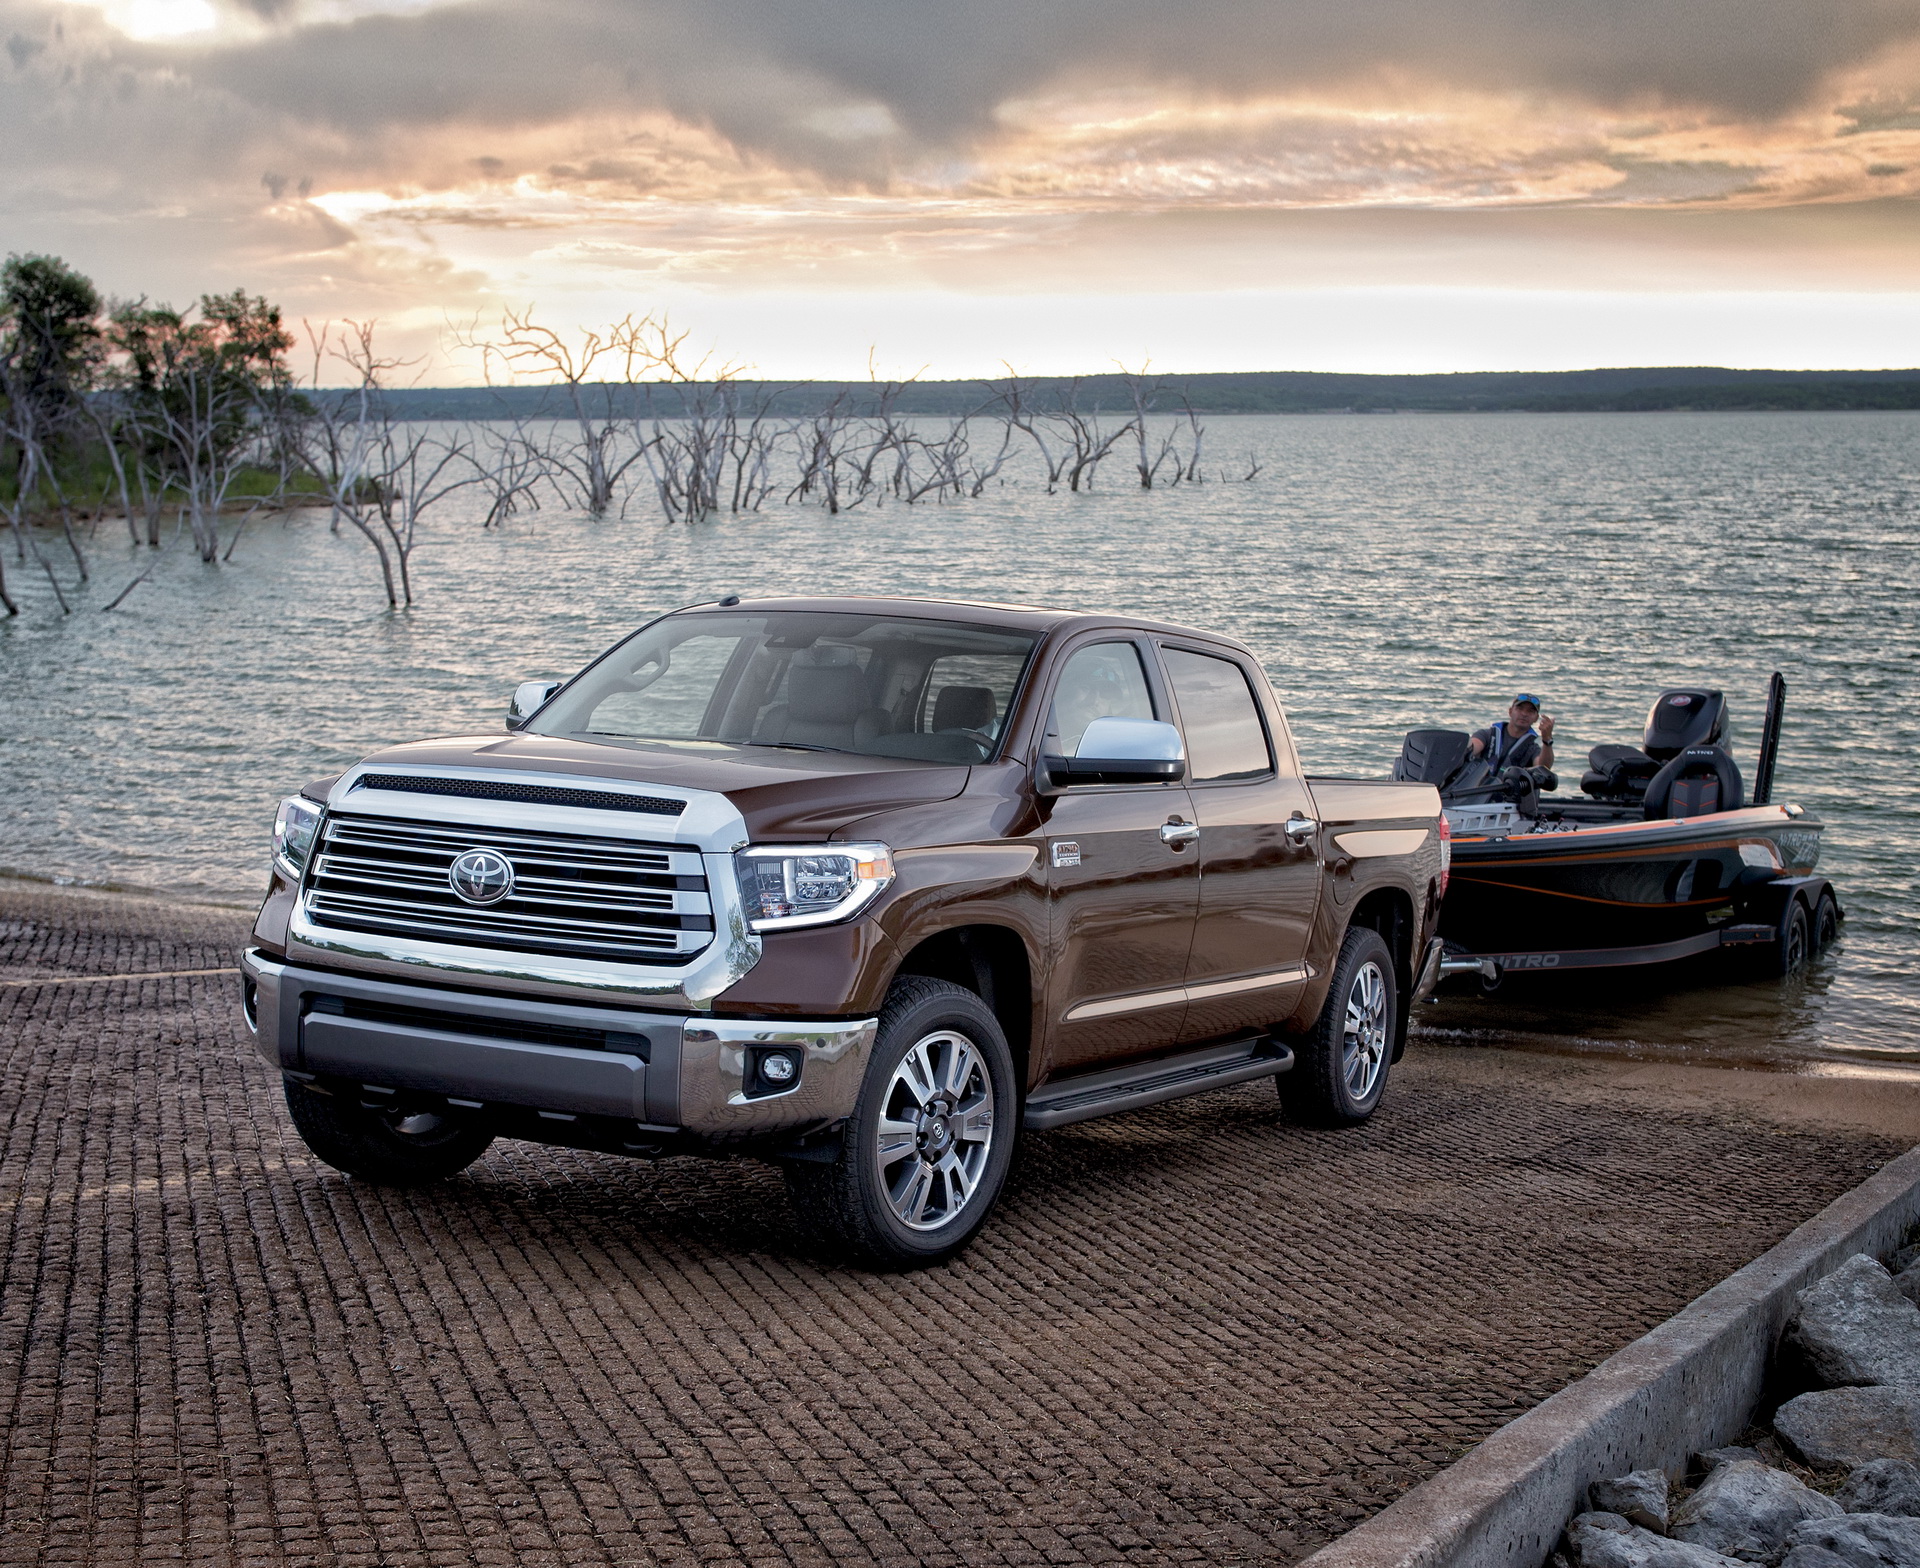 419 Awesome 2016 toyota tundra 46 review for Android Wallpaper